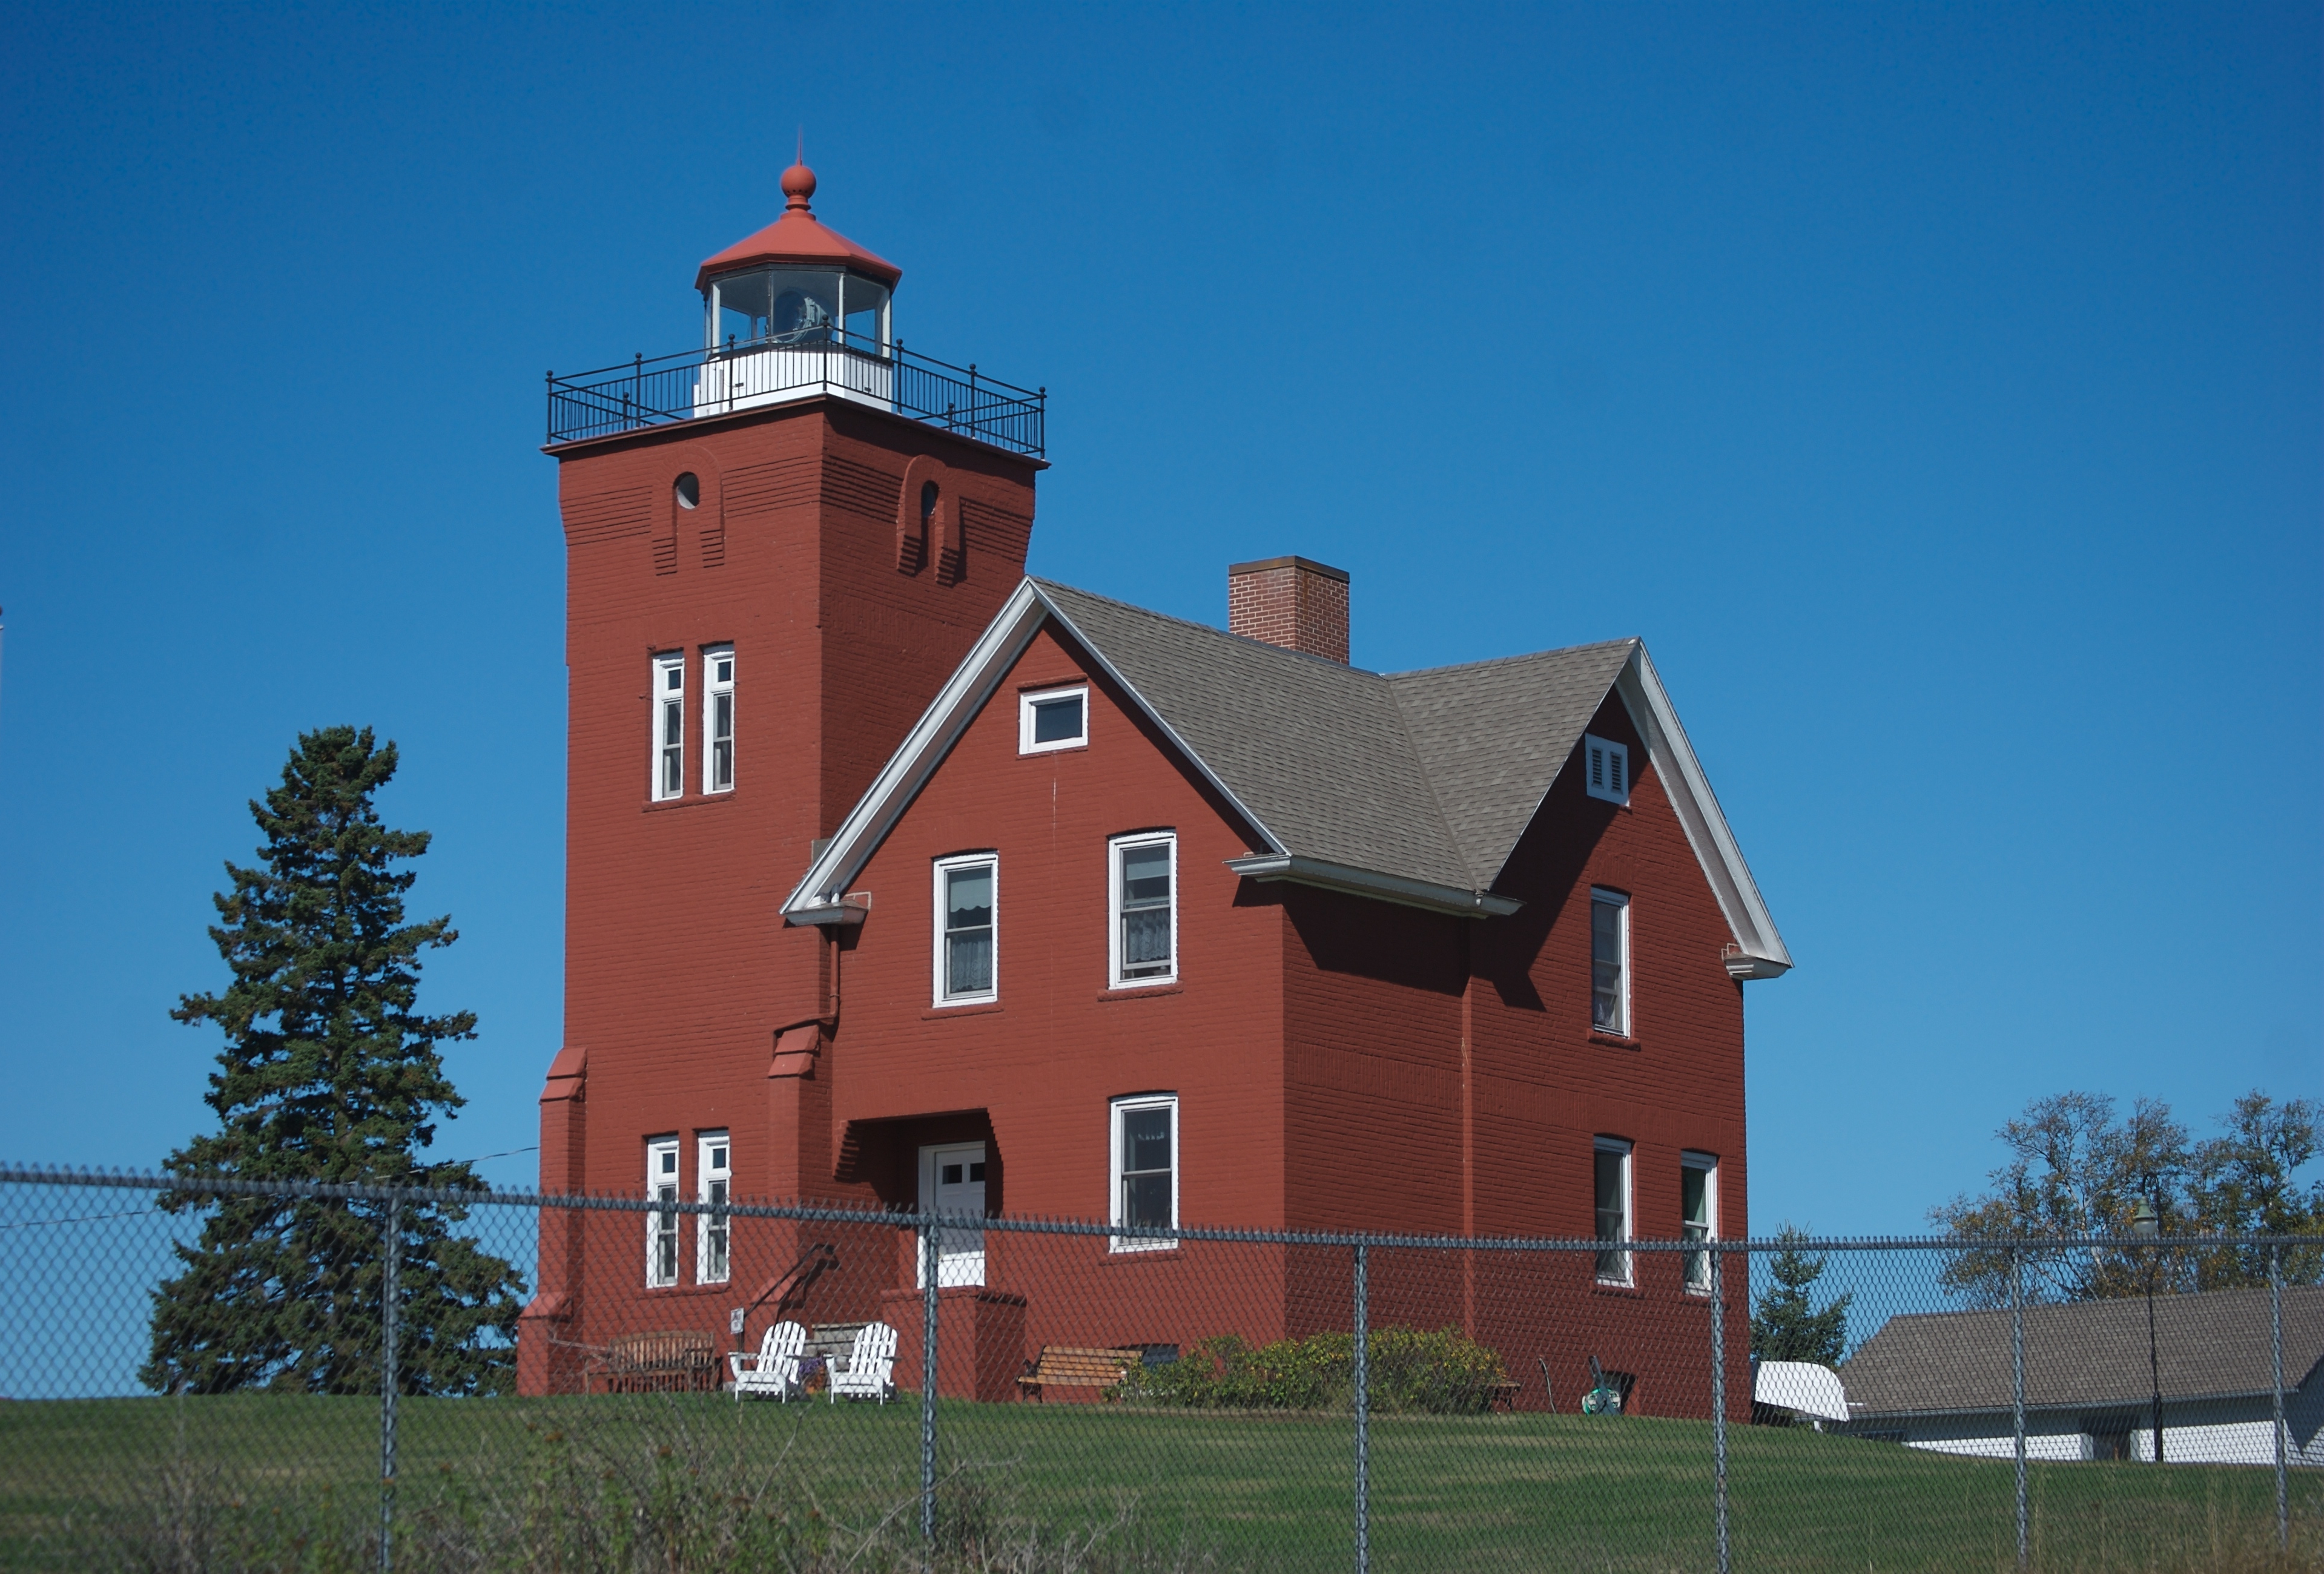 Photo of Two Harbors Lighthouse